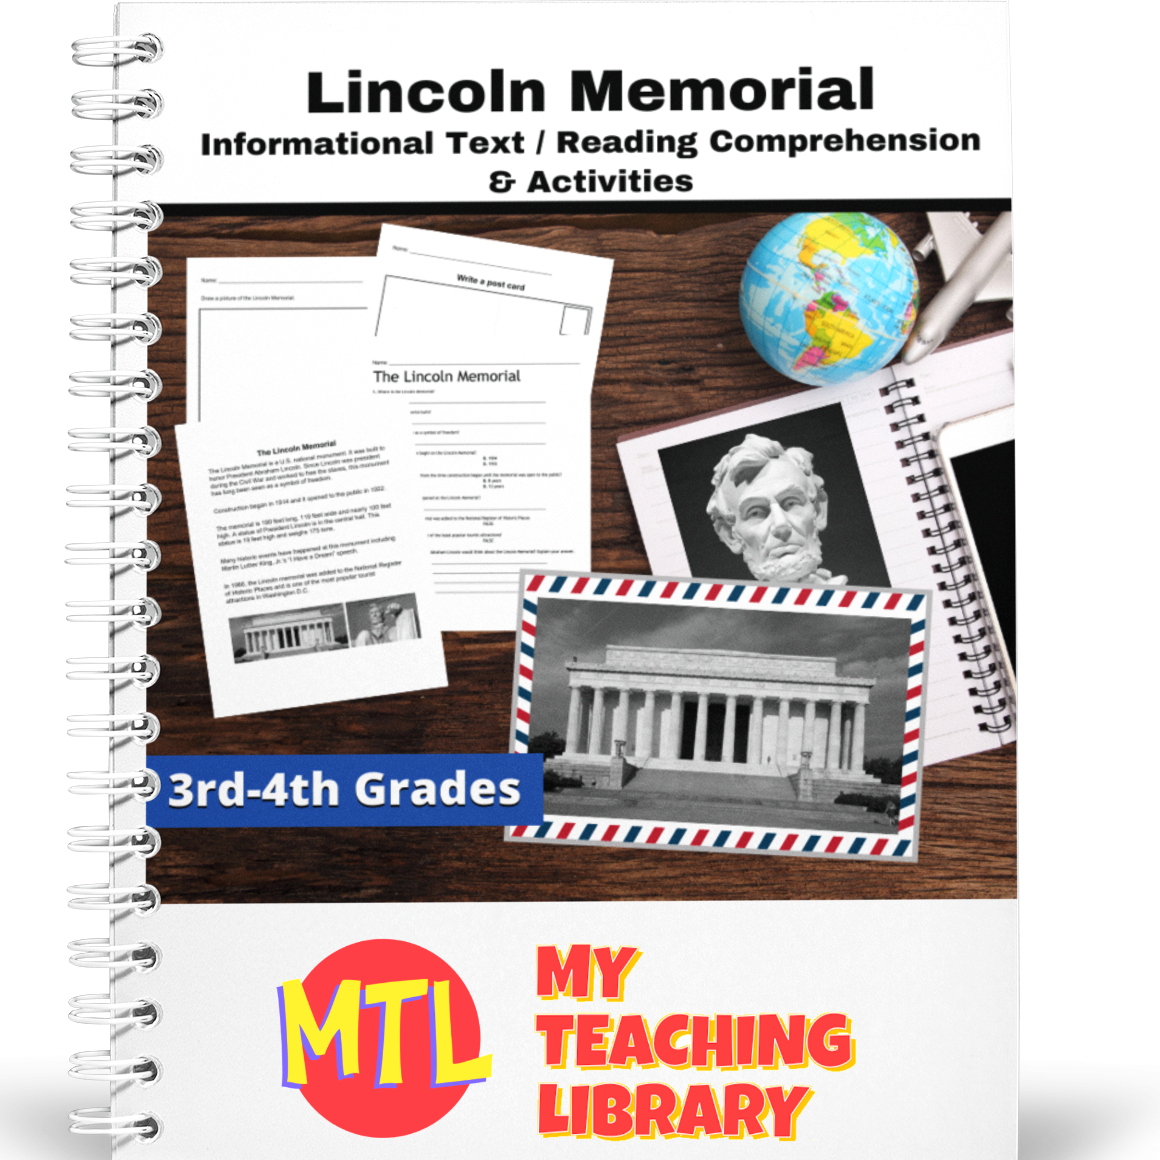 Lincoln Memorial Informational Text 3rd-4th cover